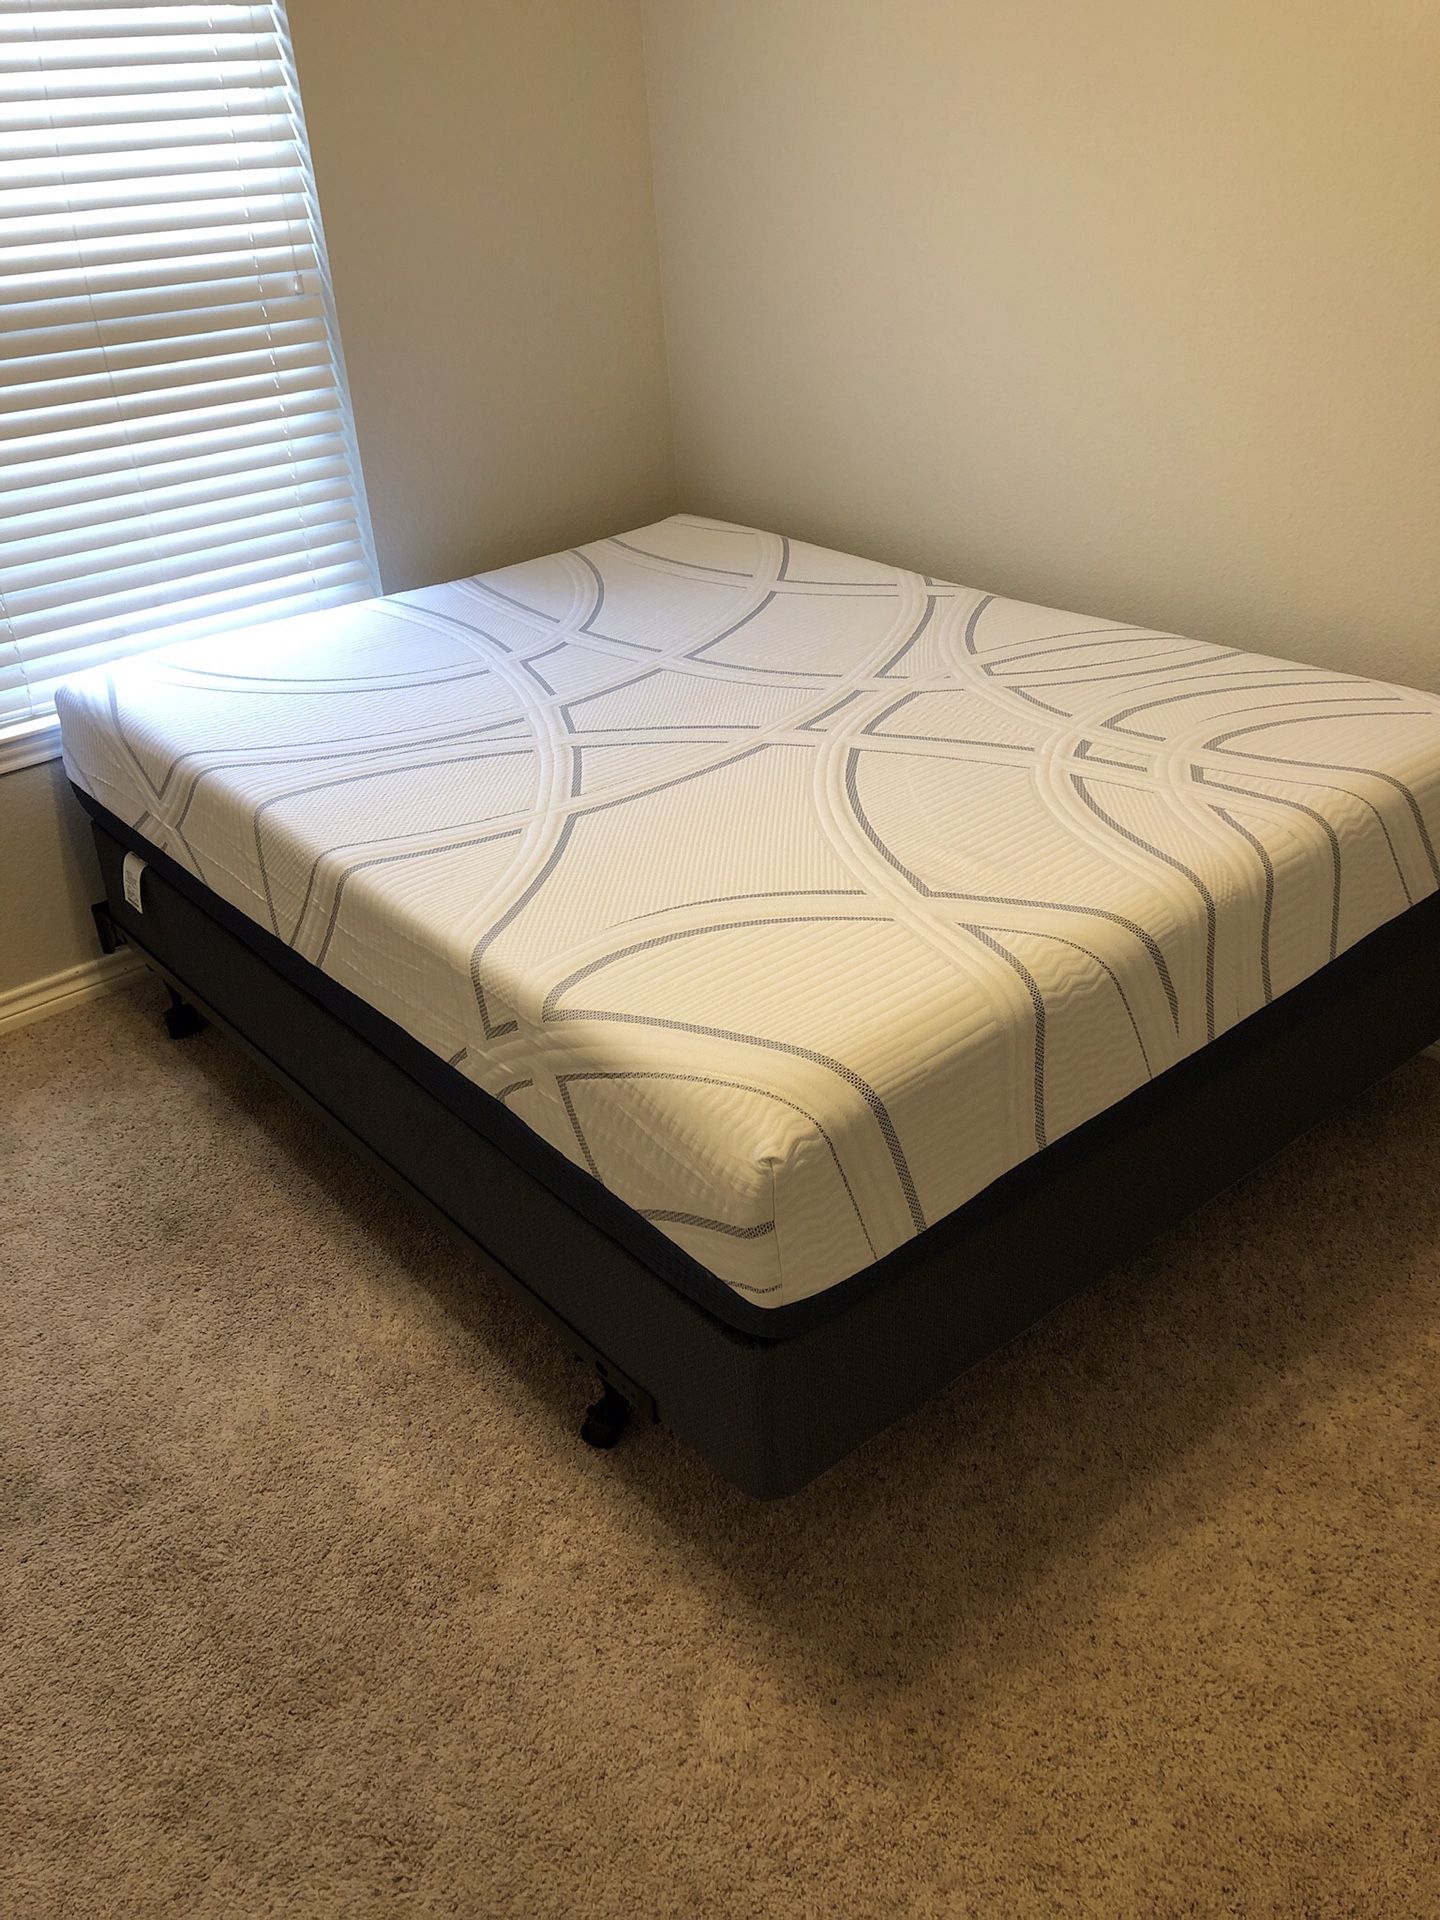 New Mattress, Box Spring, Head Board, and Bed Frame